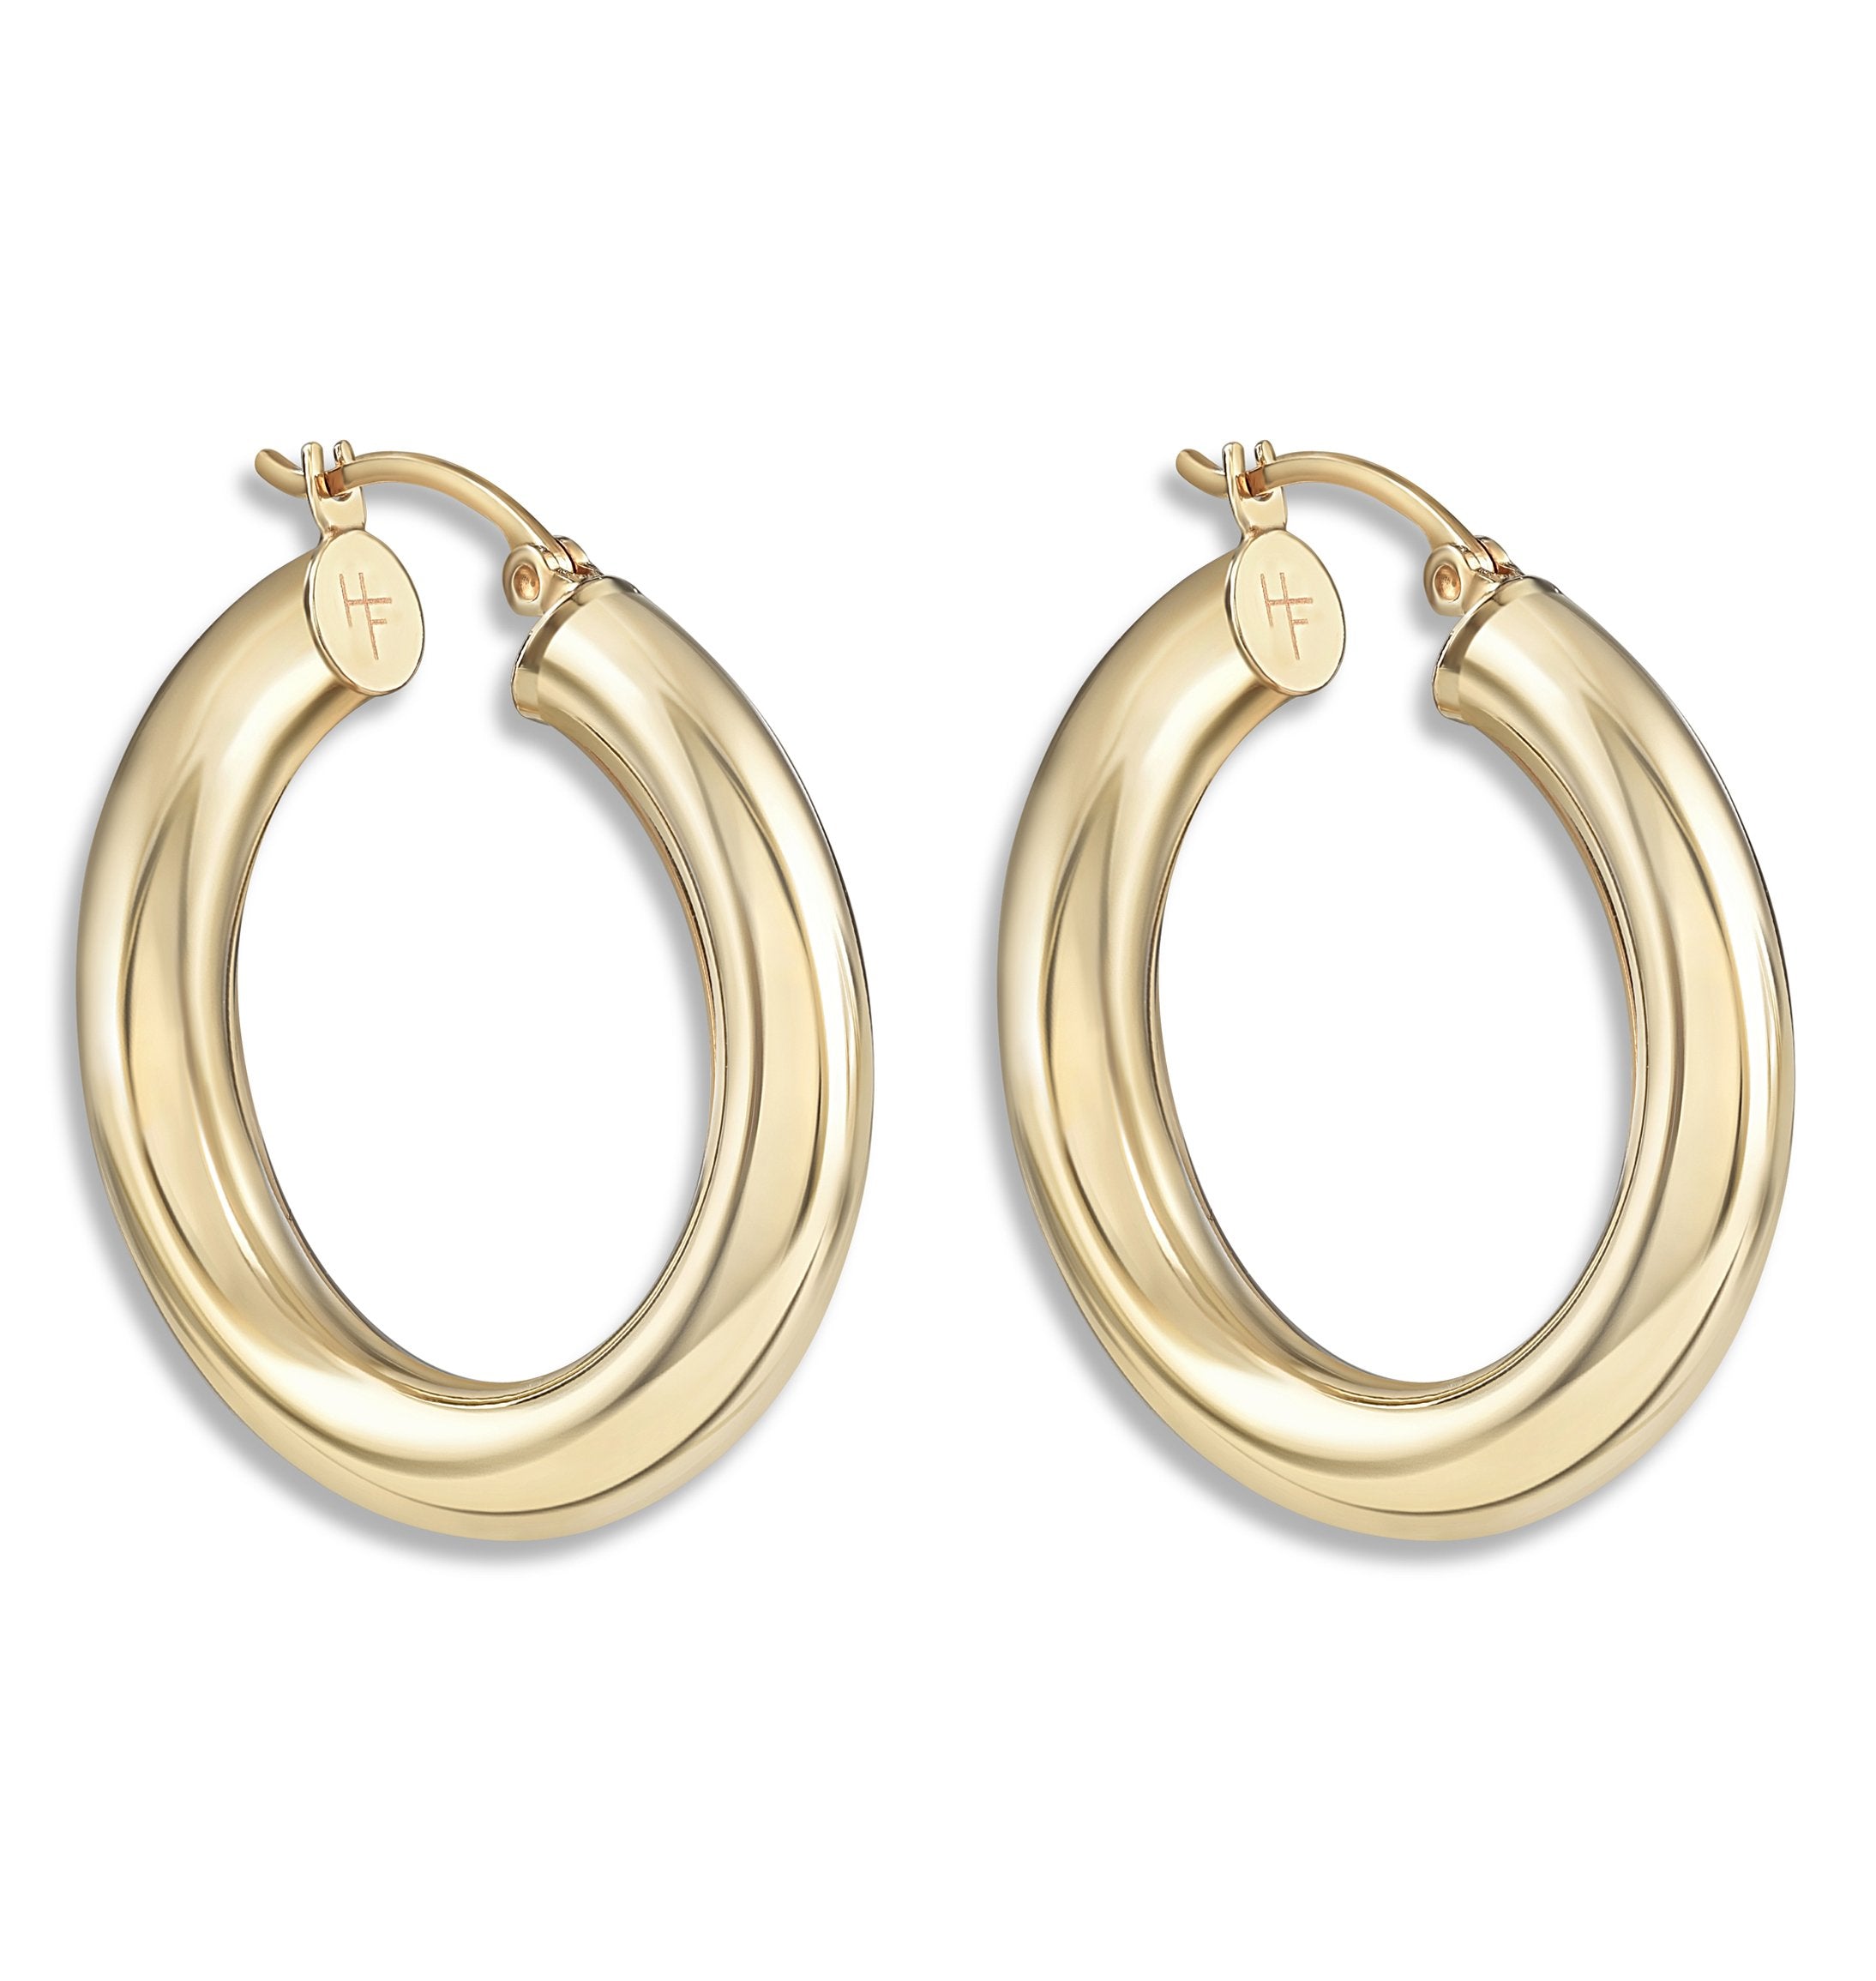 Amazoncom 14k Gold Plated Thick Gold Hoop Earrings Lightweight Hollow  Tube Earings for Women Hypoallergenic Chunky GoldSilver Hoop Earrings  25mm Clothing Shoes  Jewelry